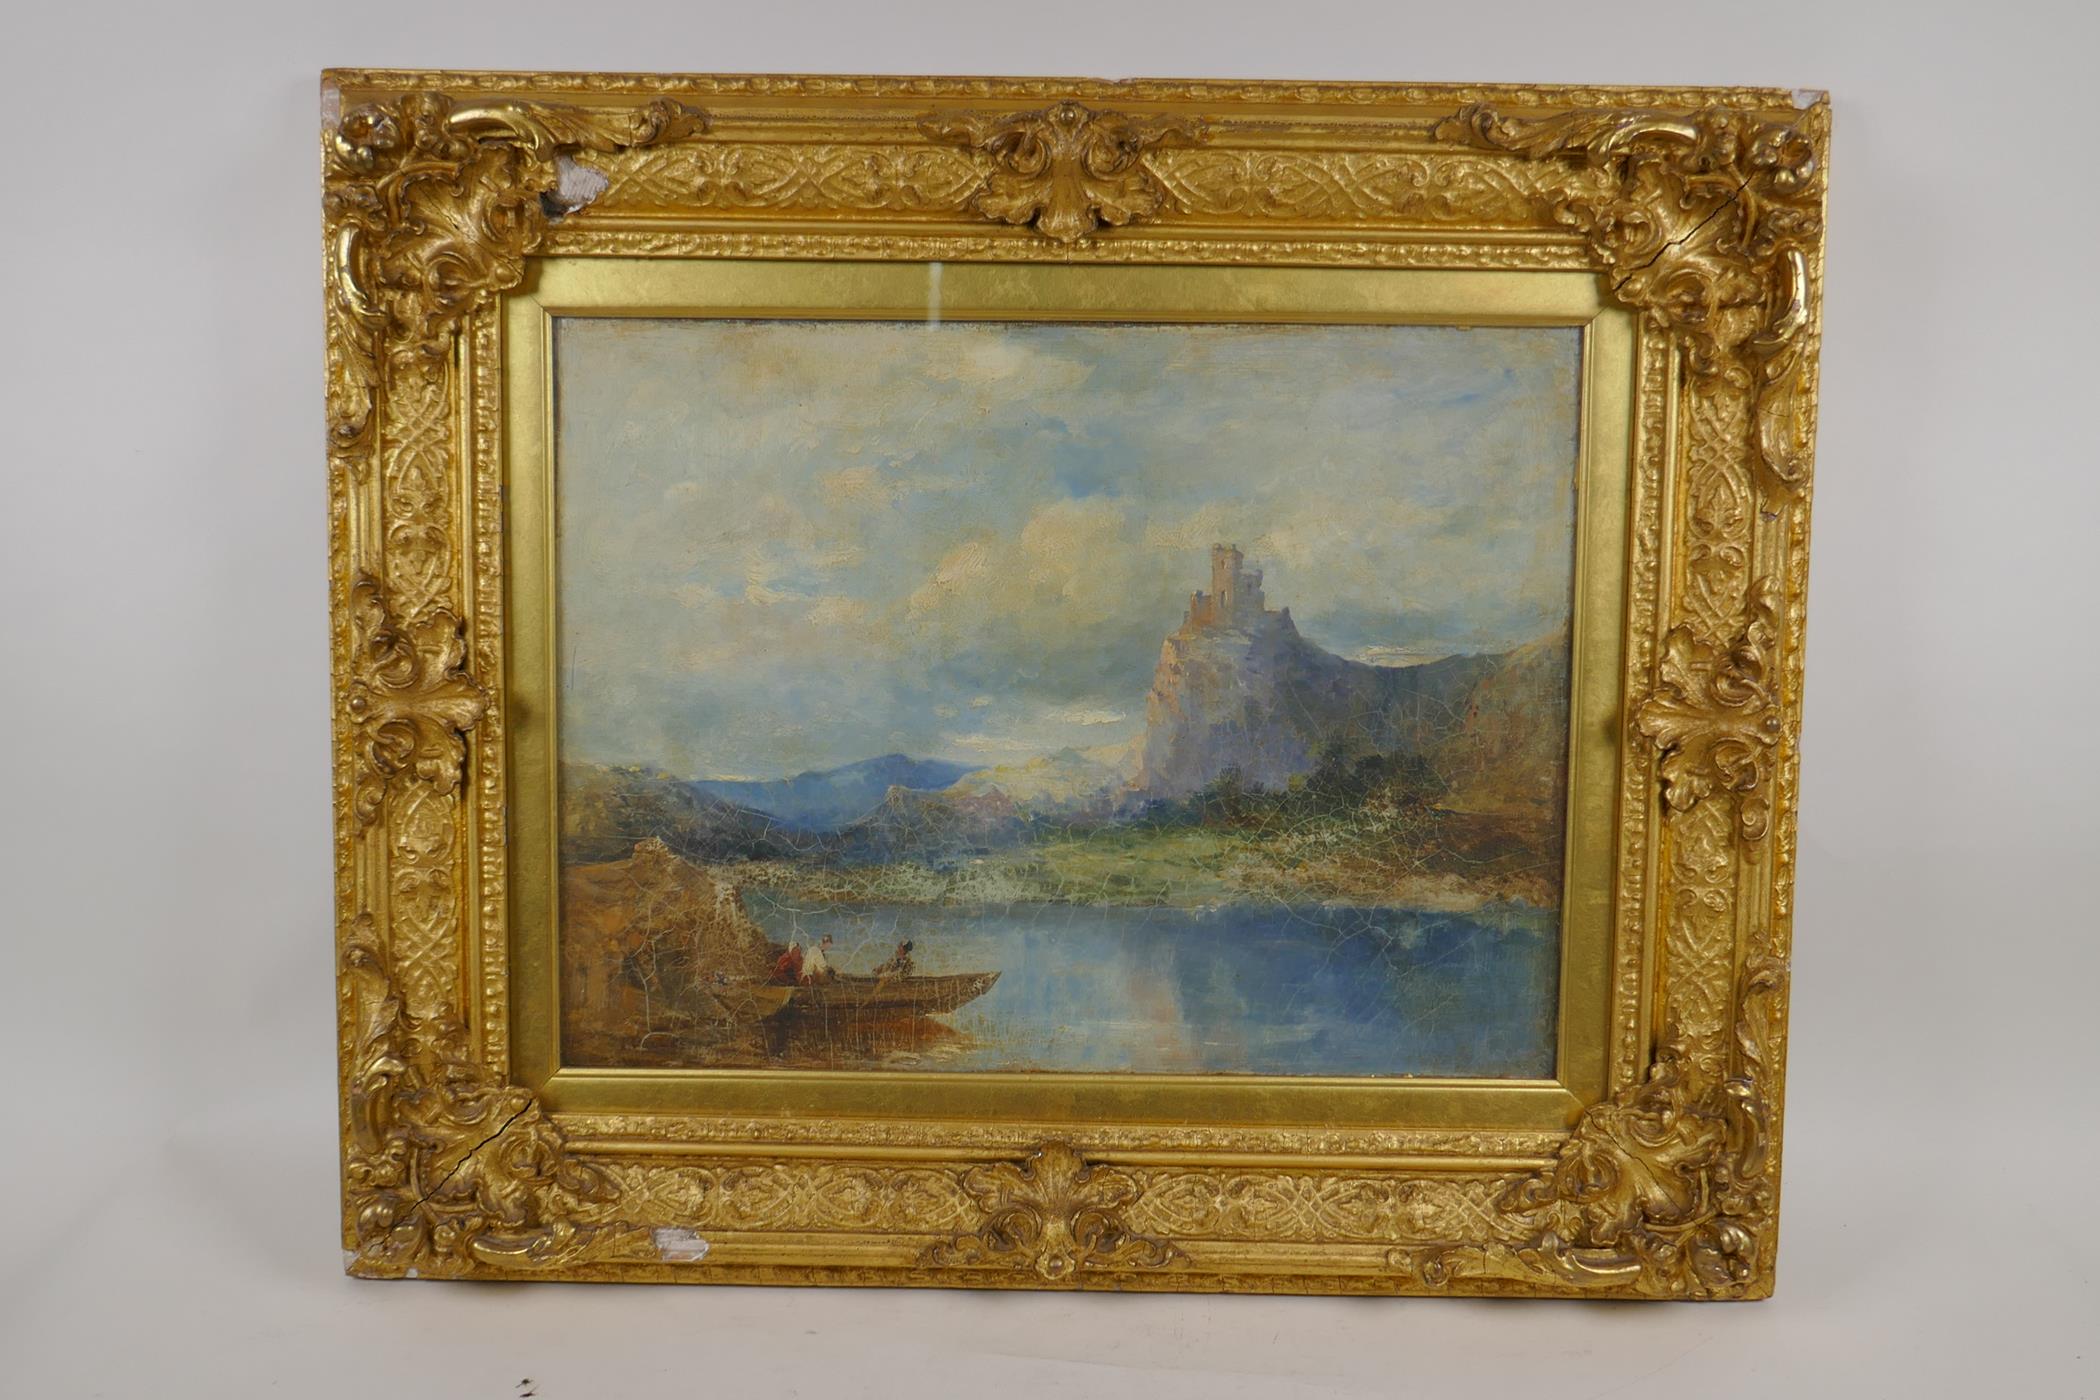 Samuel Poole, figures crossing a loch with distant castle, C19th oil on canvas, relined, 16" x 12" - Image 4 of 7